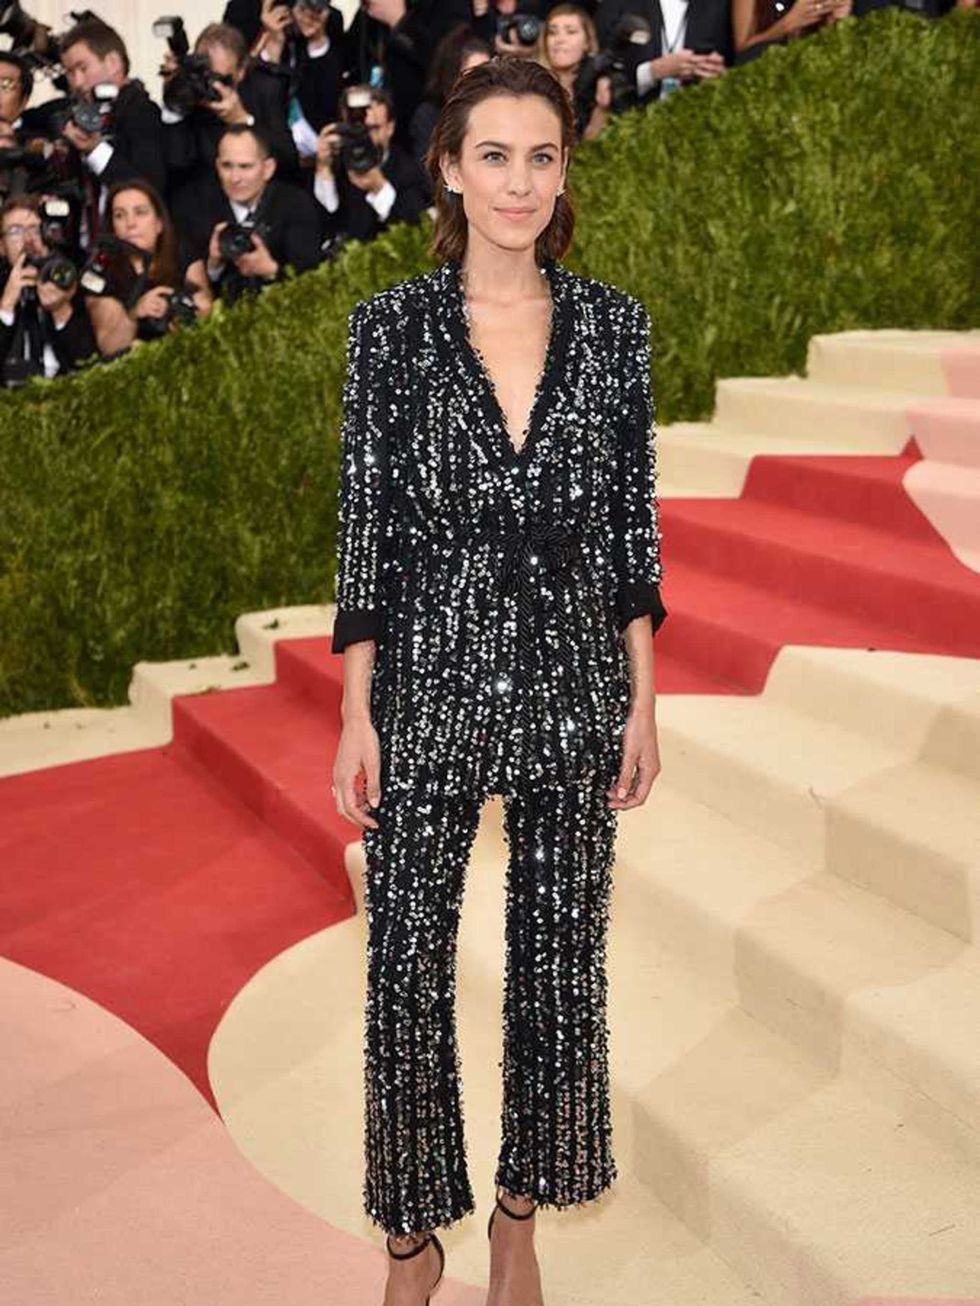 <p>Love the understated chic of this Thakoon look on Alexa Chung. Relaxed red carpet style. Nailed it. </p>